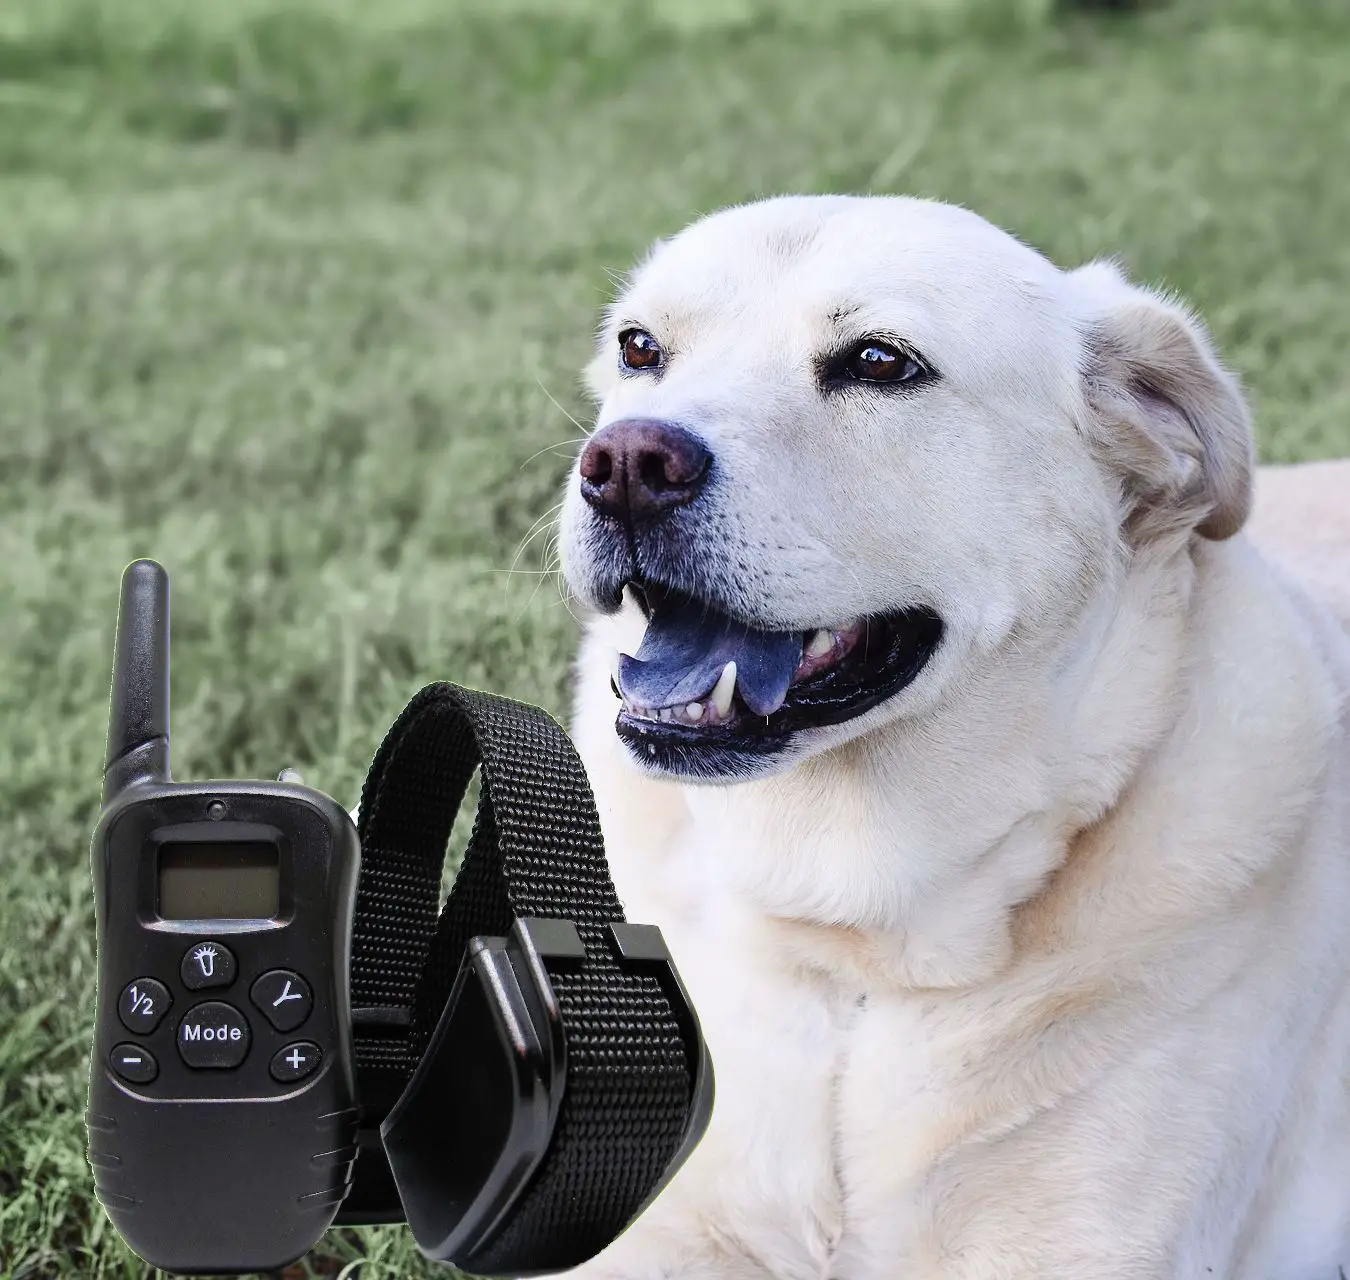 Remote Dog Collars – How Do They Work?